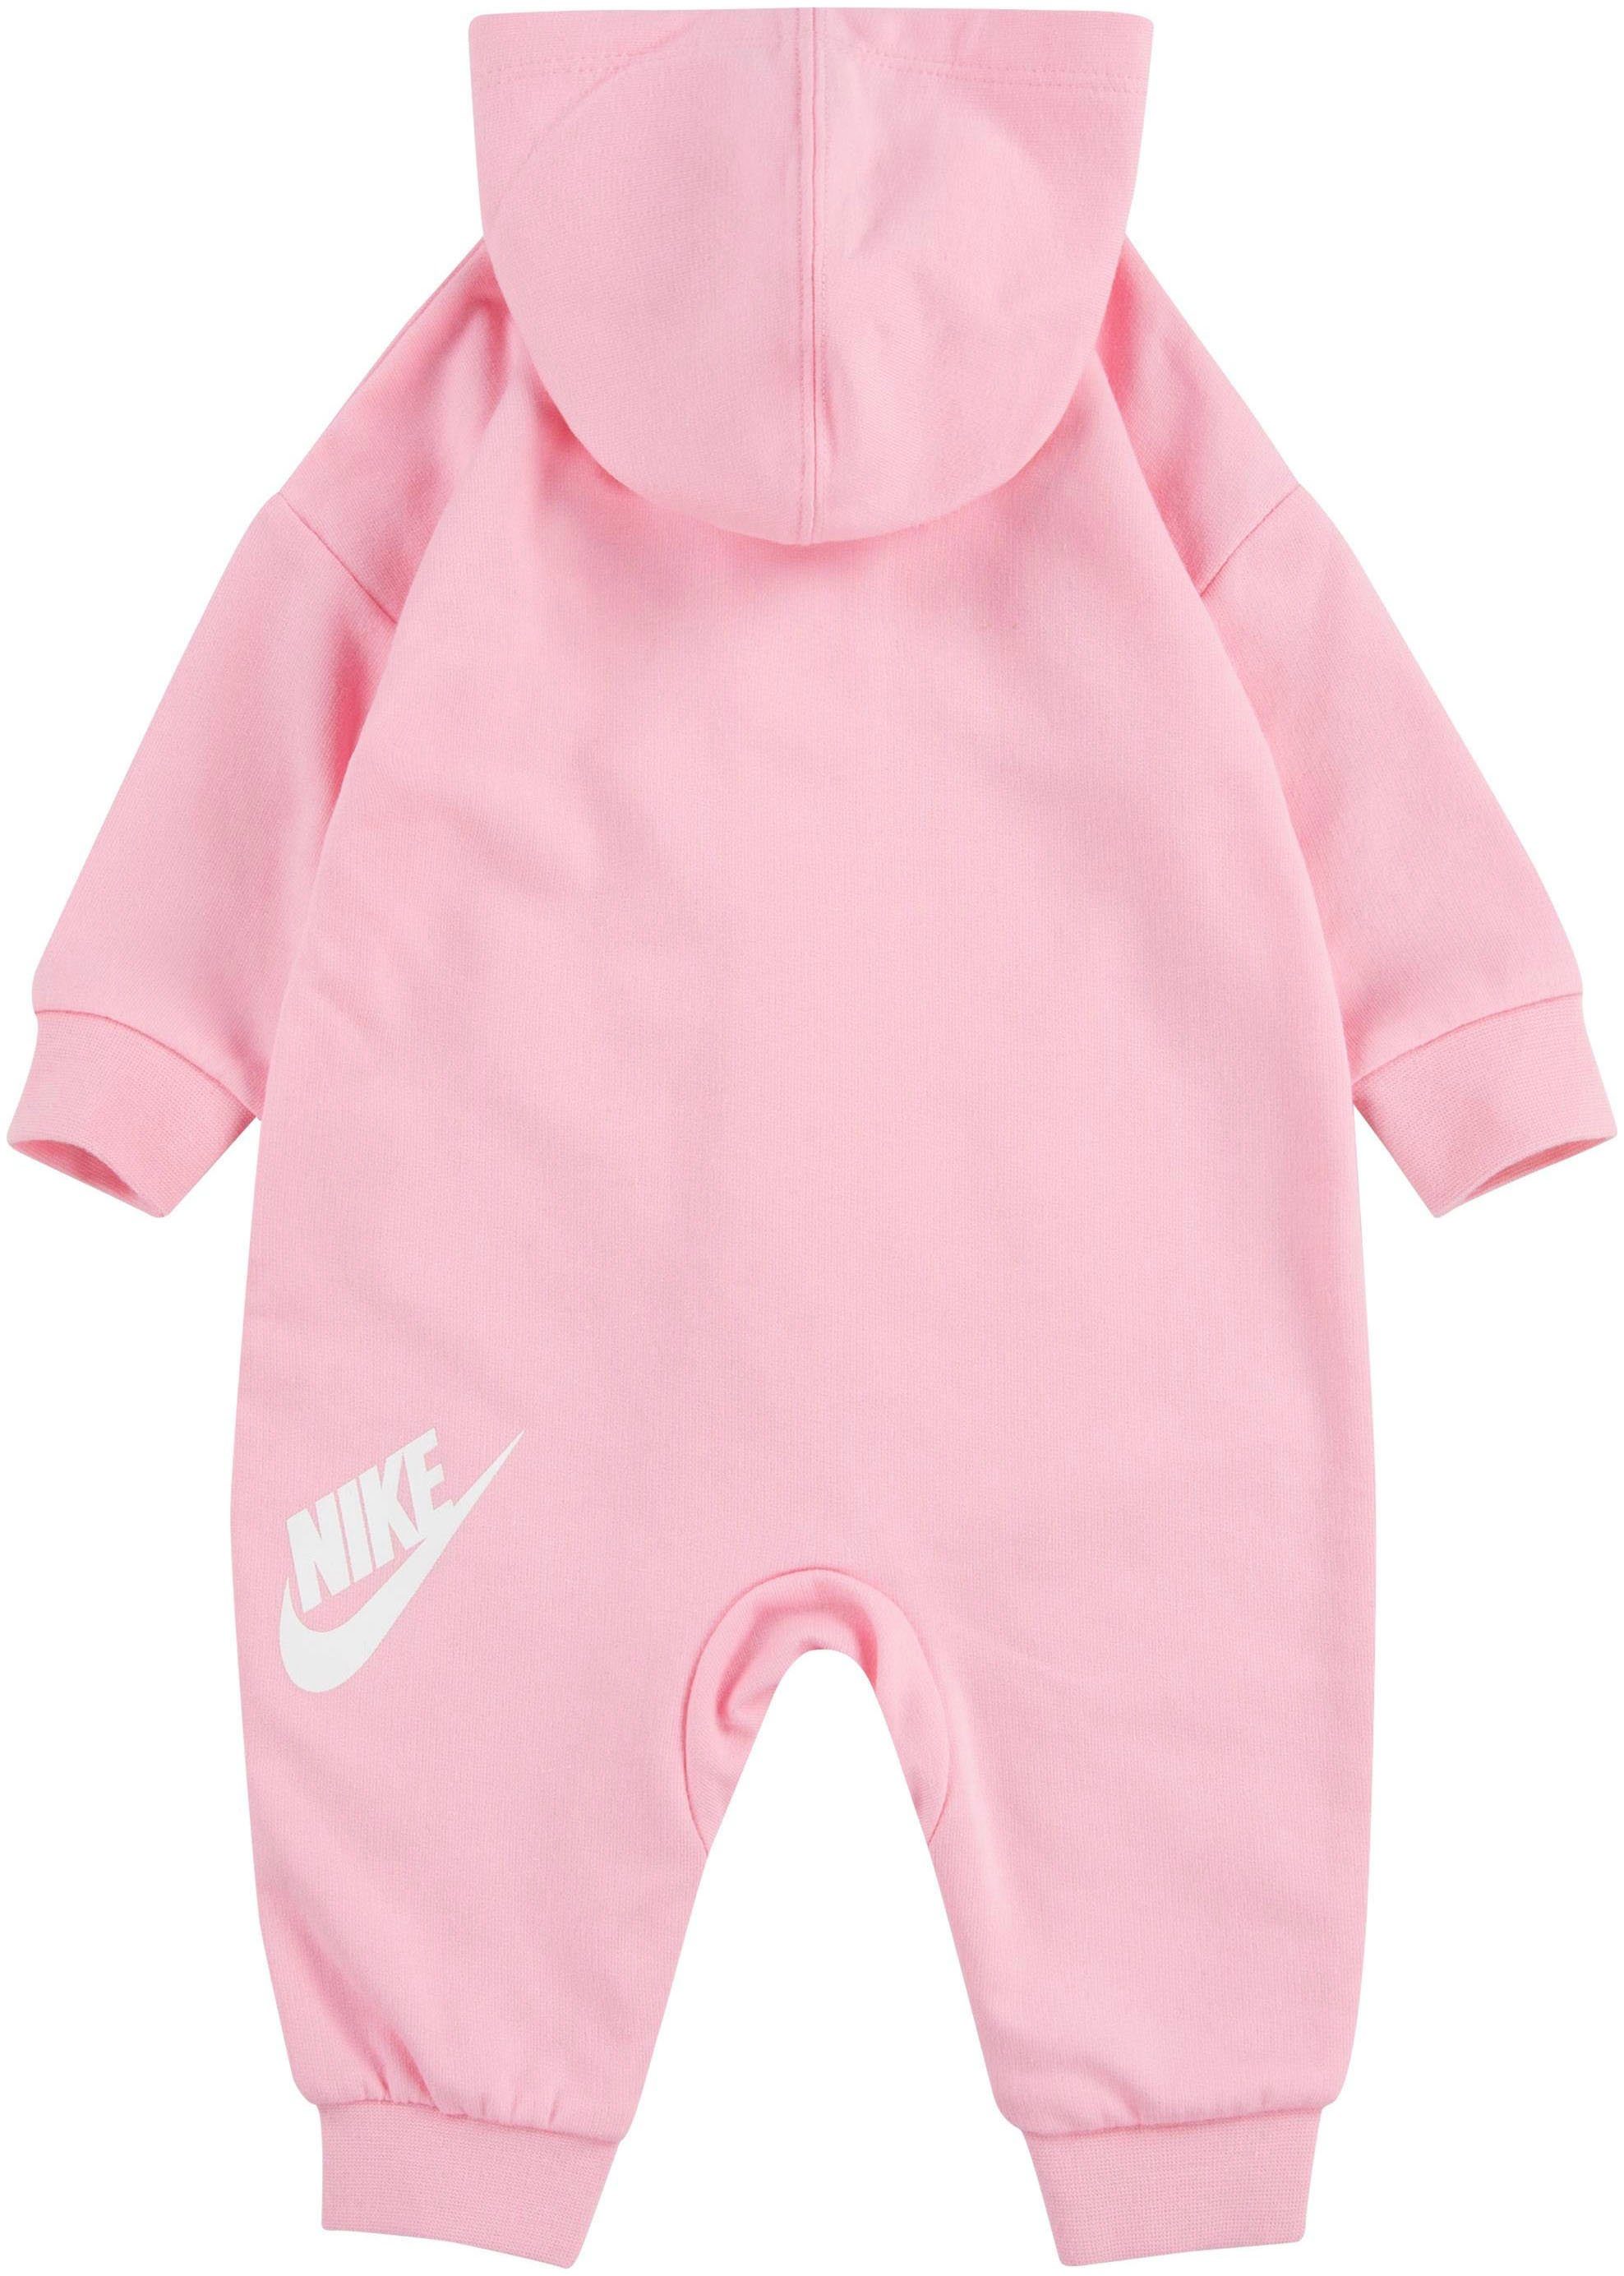 Nike Sportswear Strampler NKN ALL PLAY DAY COVERALL rosa-weiß